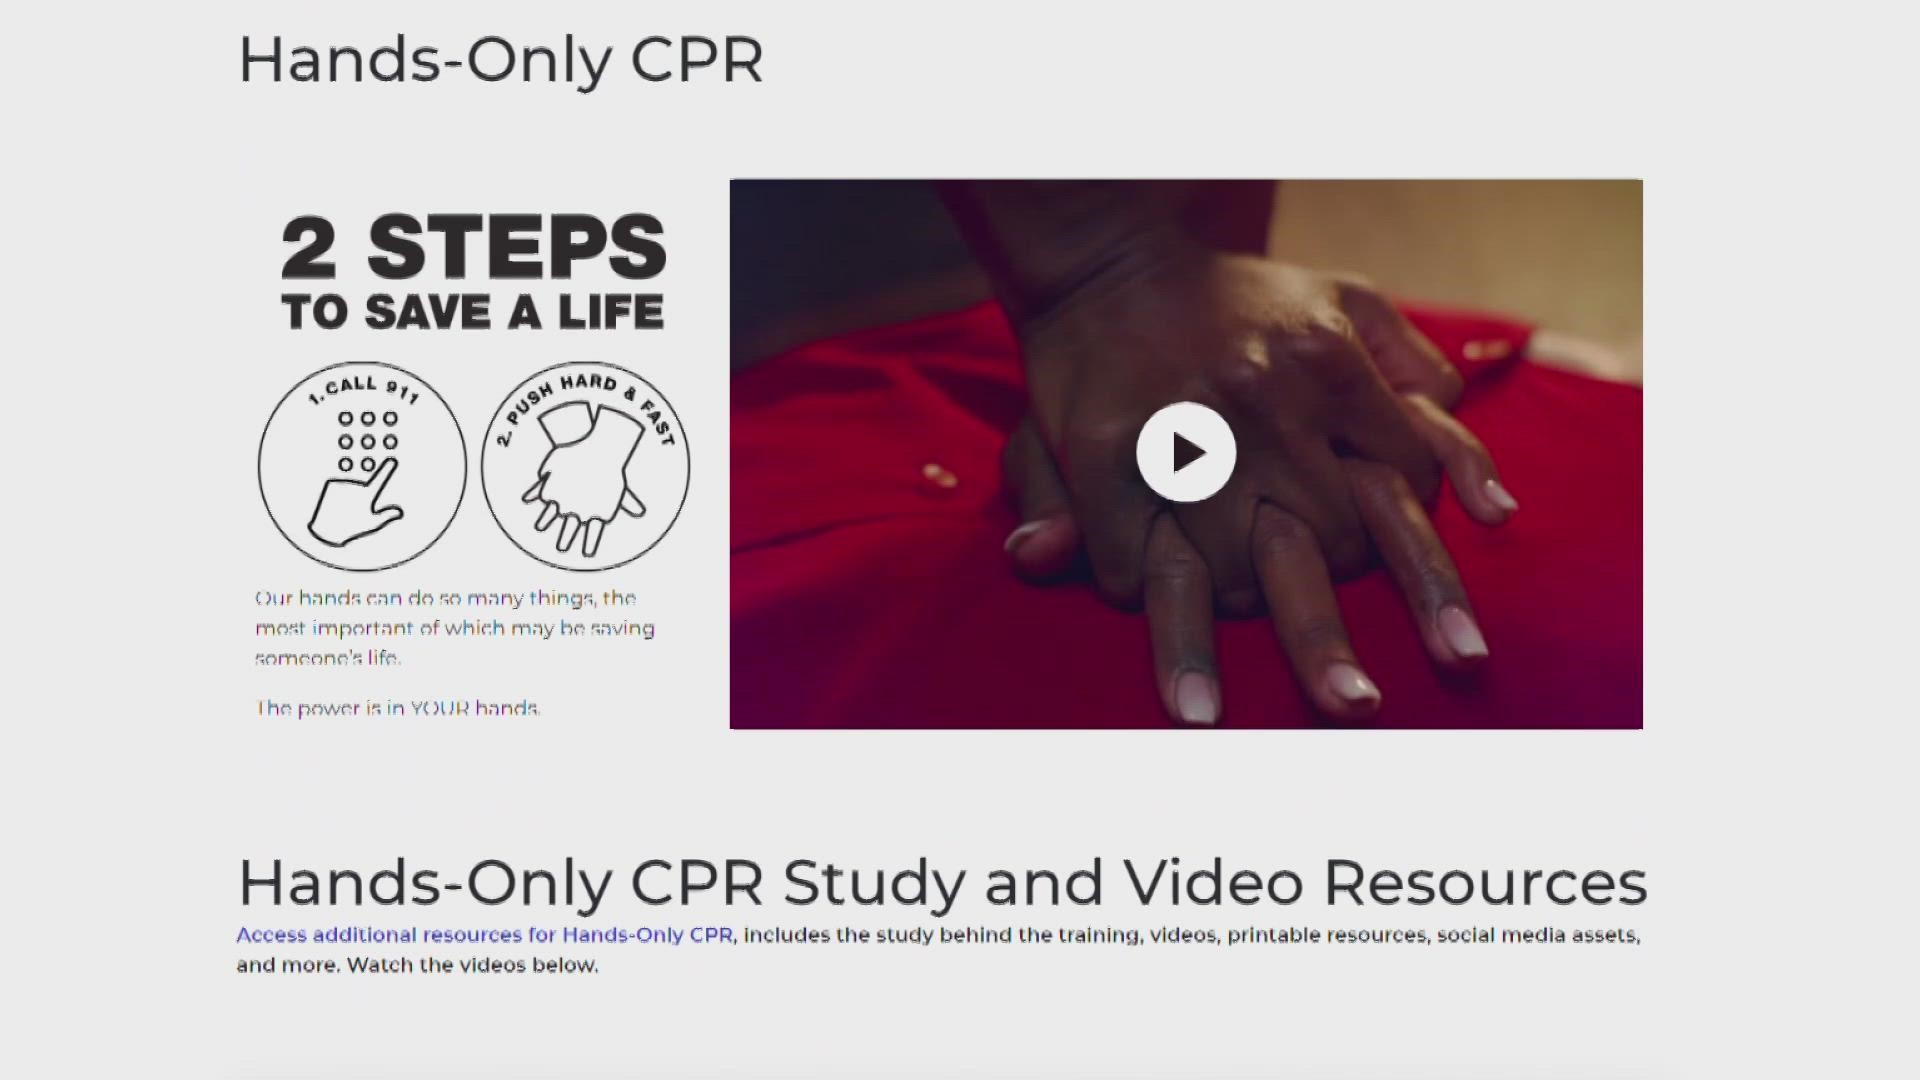 Maureen Rockwell wants more Mainers to learn hands-only CPR, which can be learned without certification.